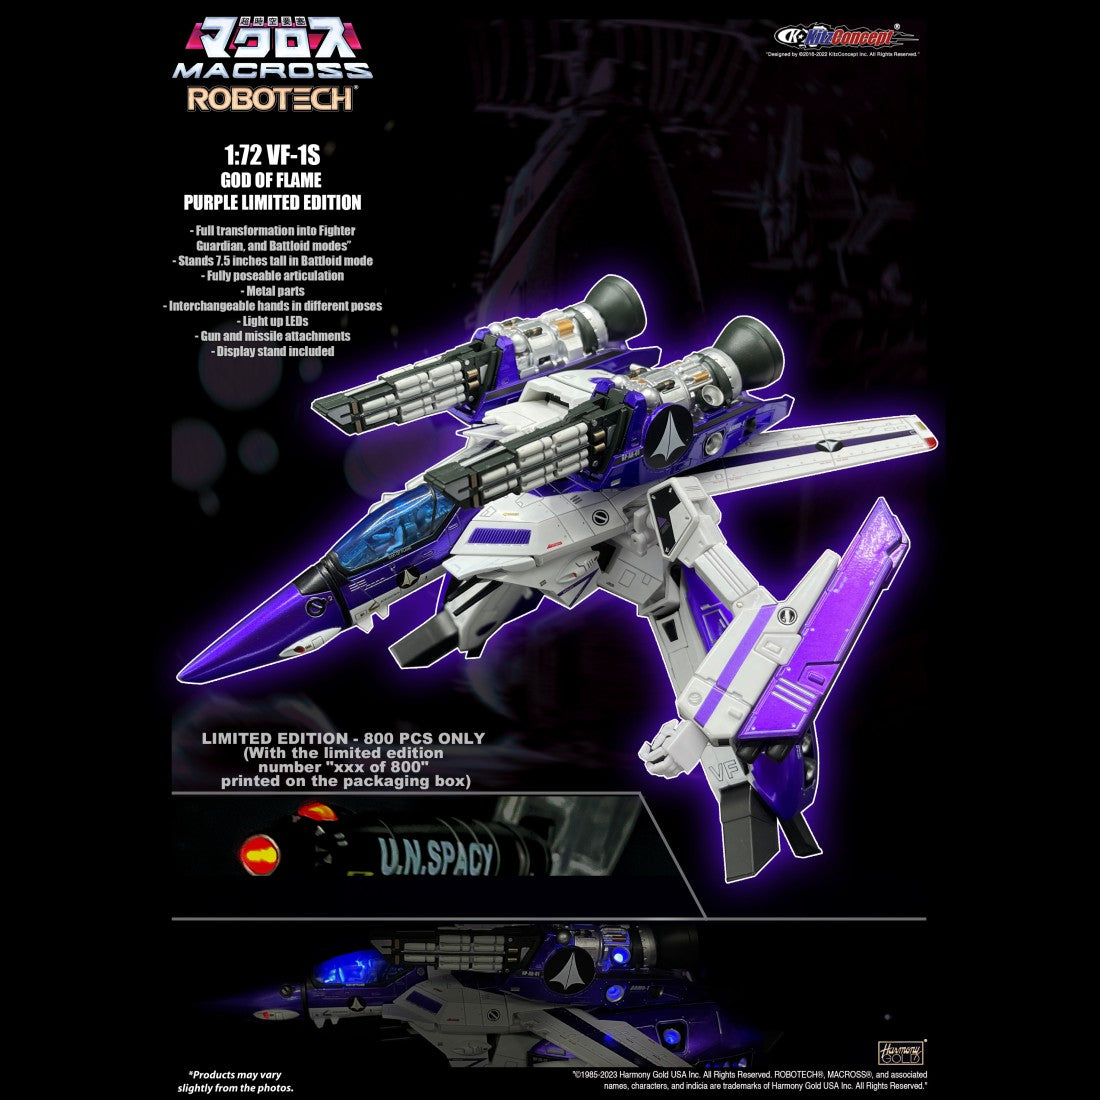 Macross 1/72 VF-1S God of Flame Purple Limited Edition w/ Fast Pack Armor - KitzConcept